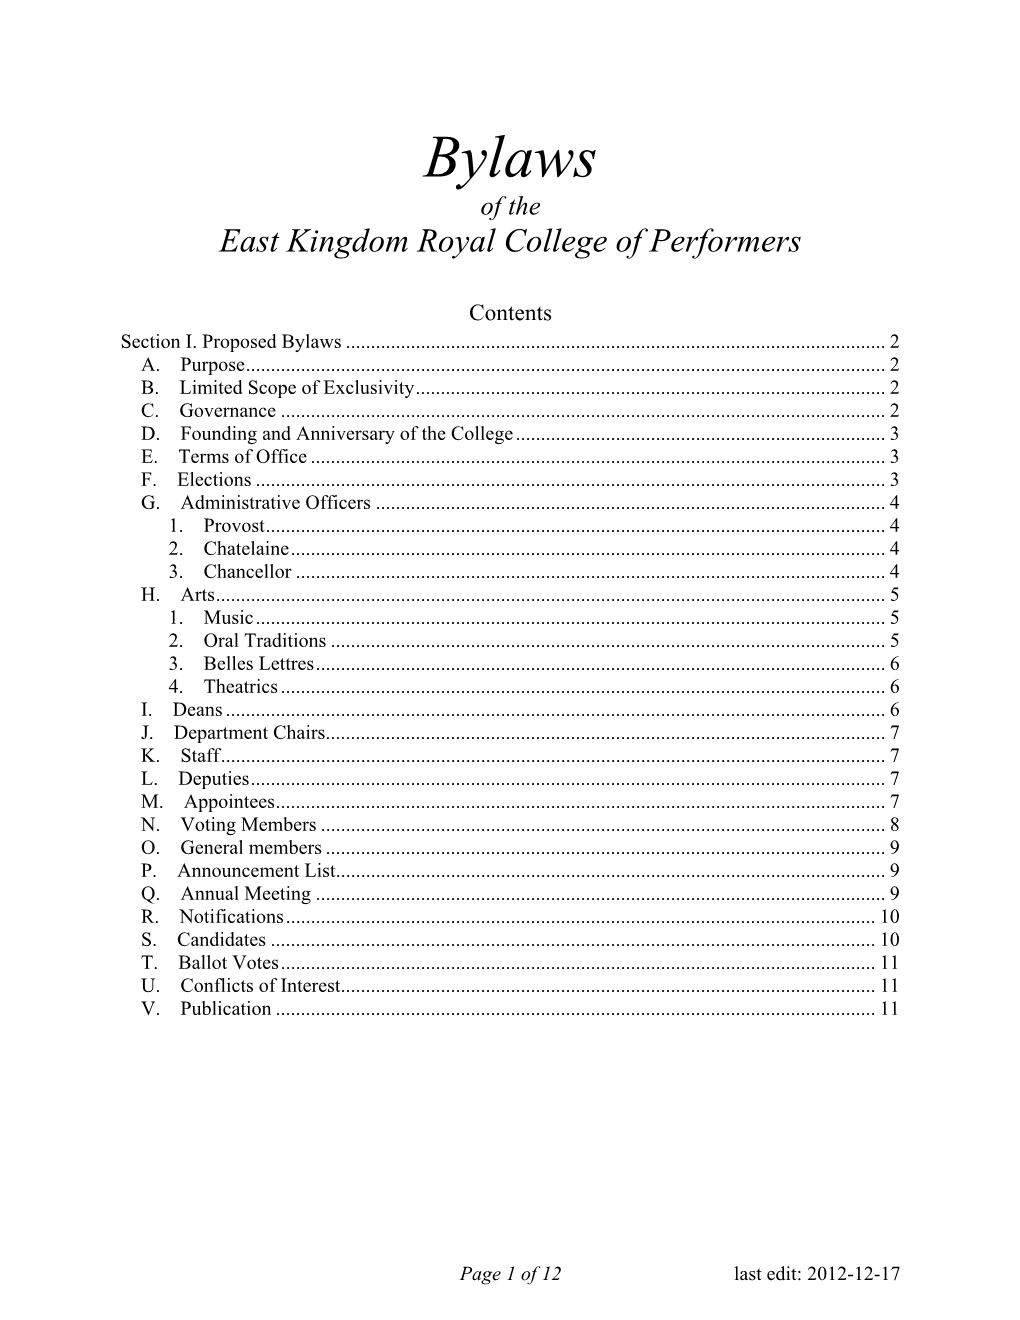 Bylaws of the East Kingdom Royal College of Performers